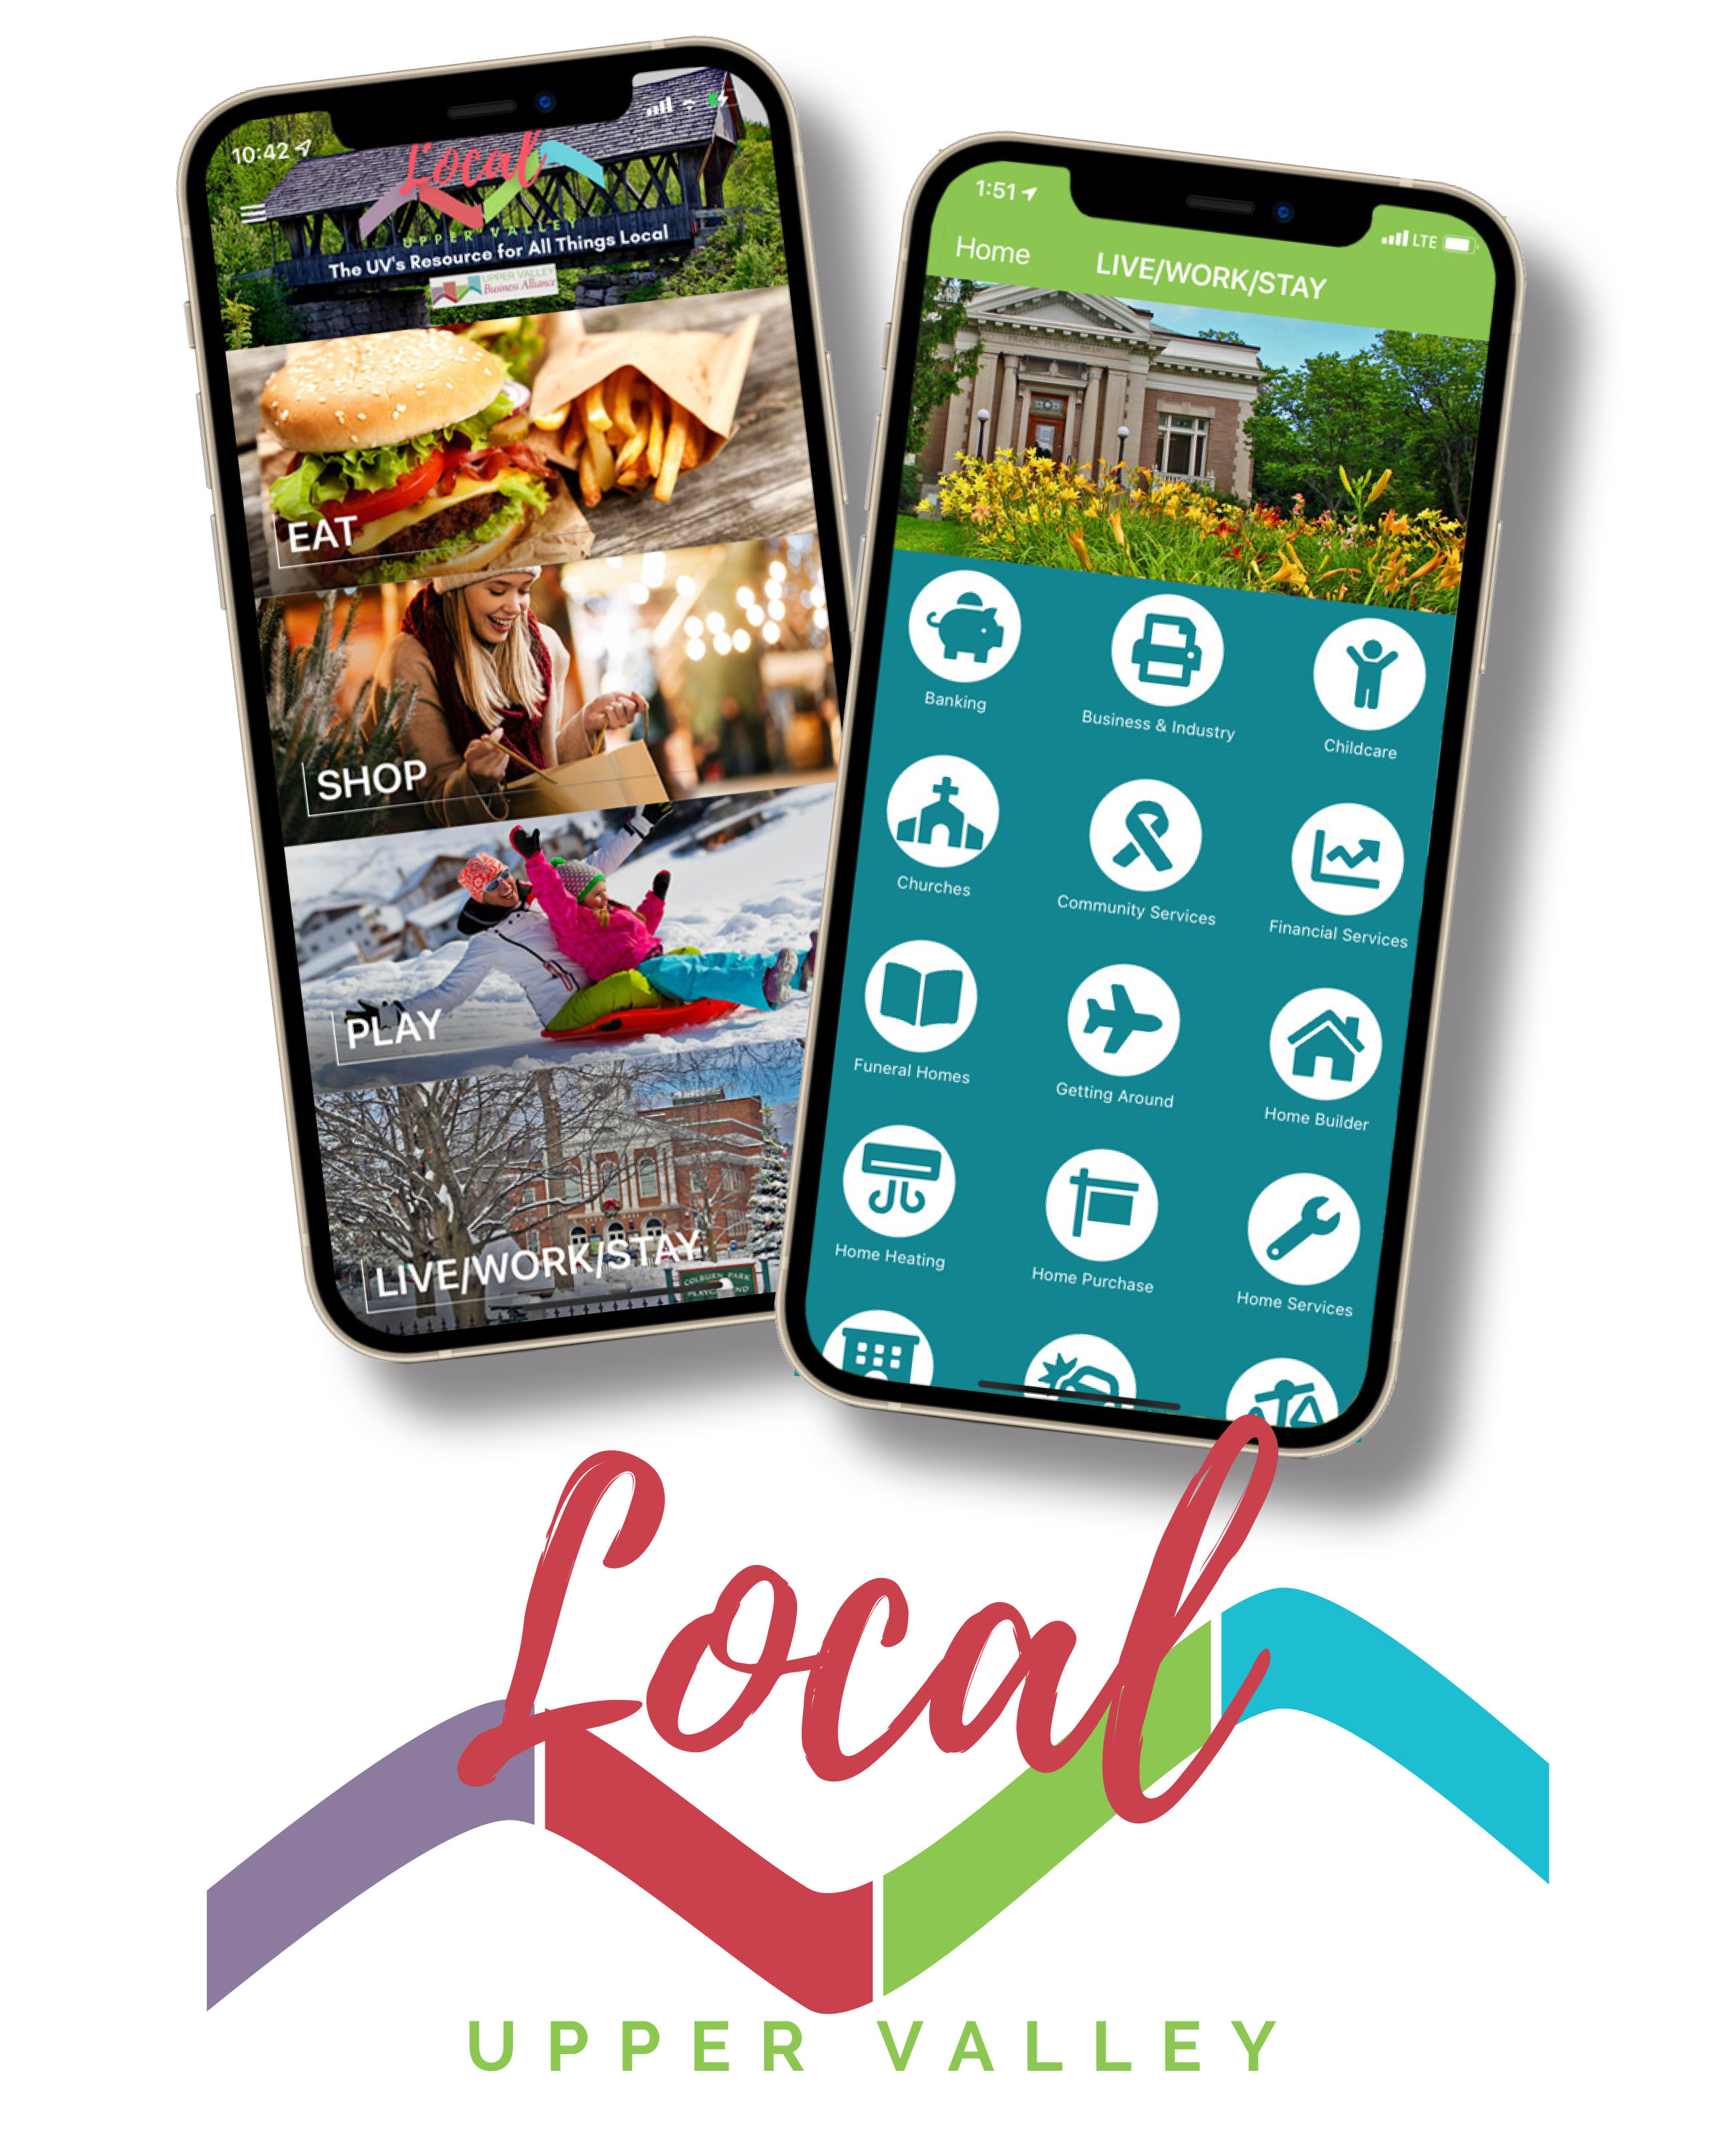 Local Upper Valley Mobile App